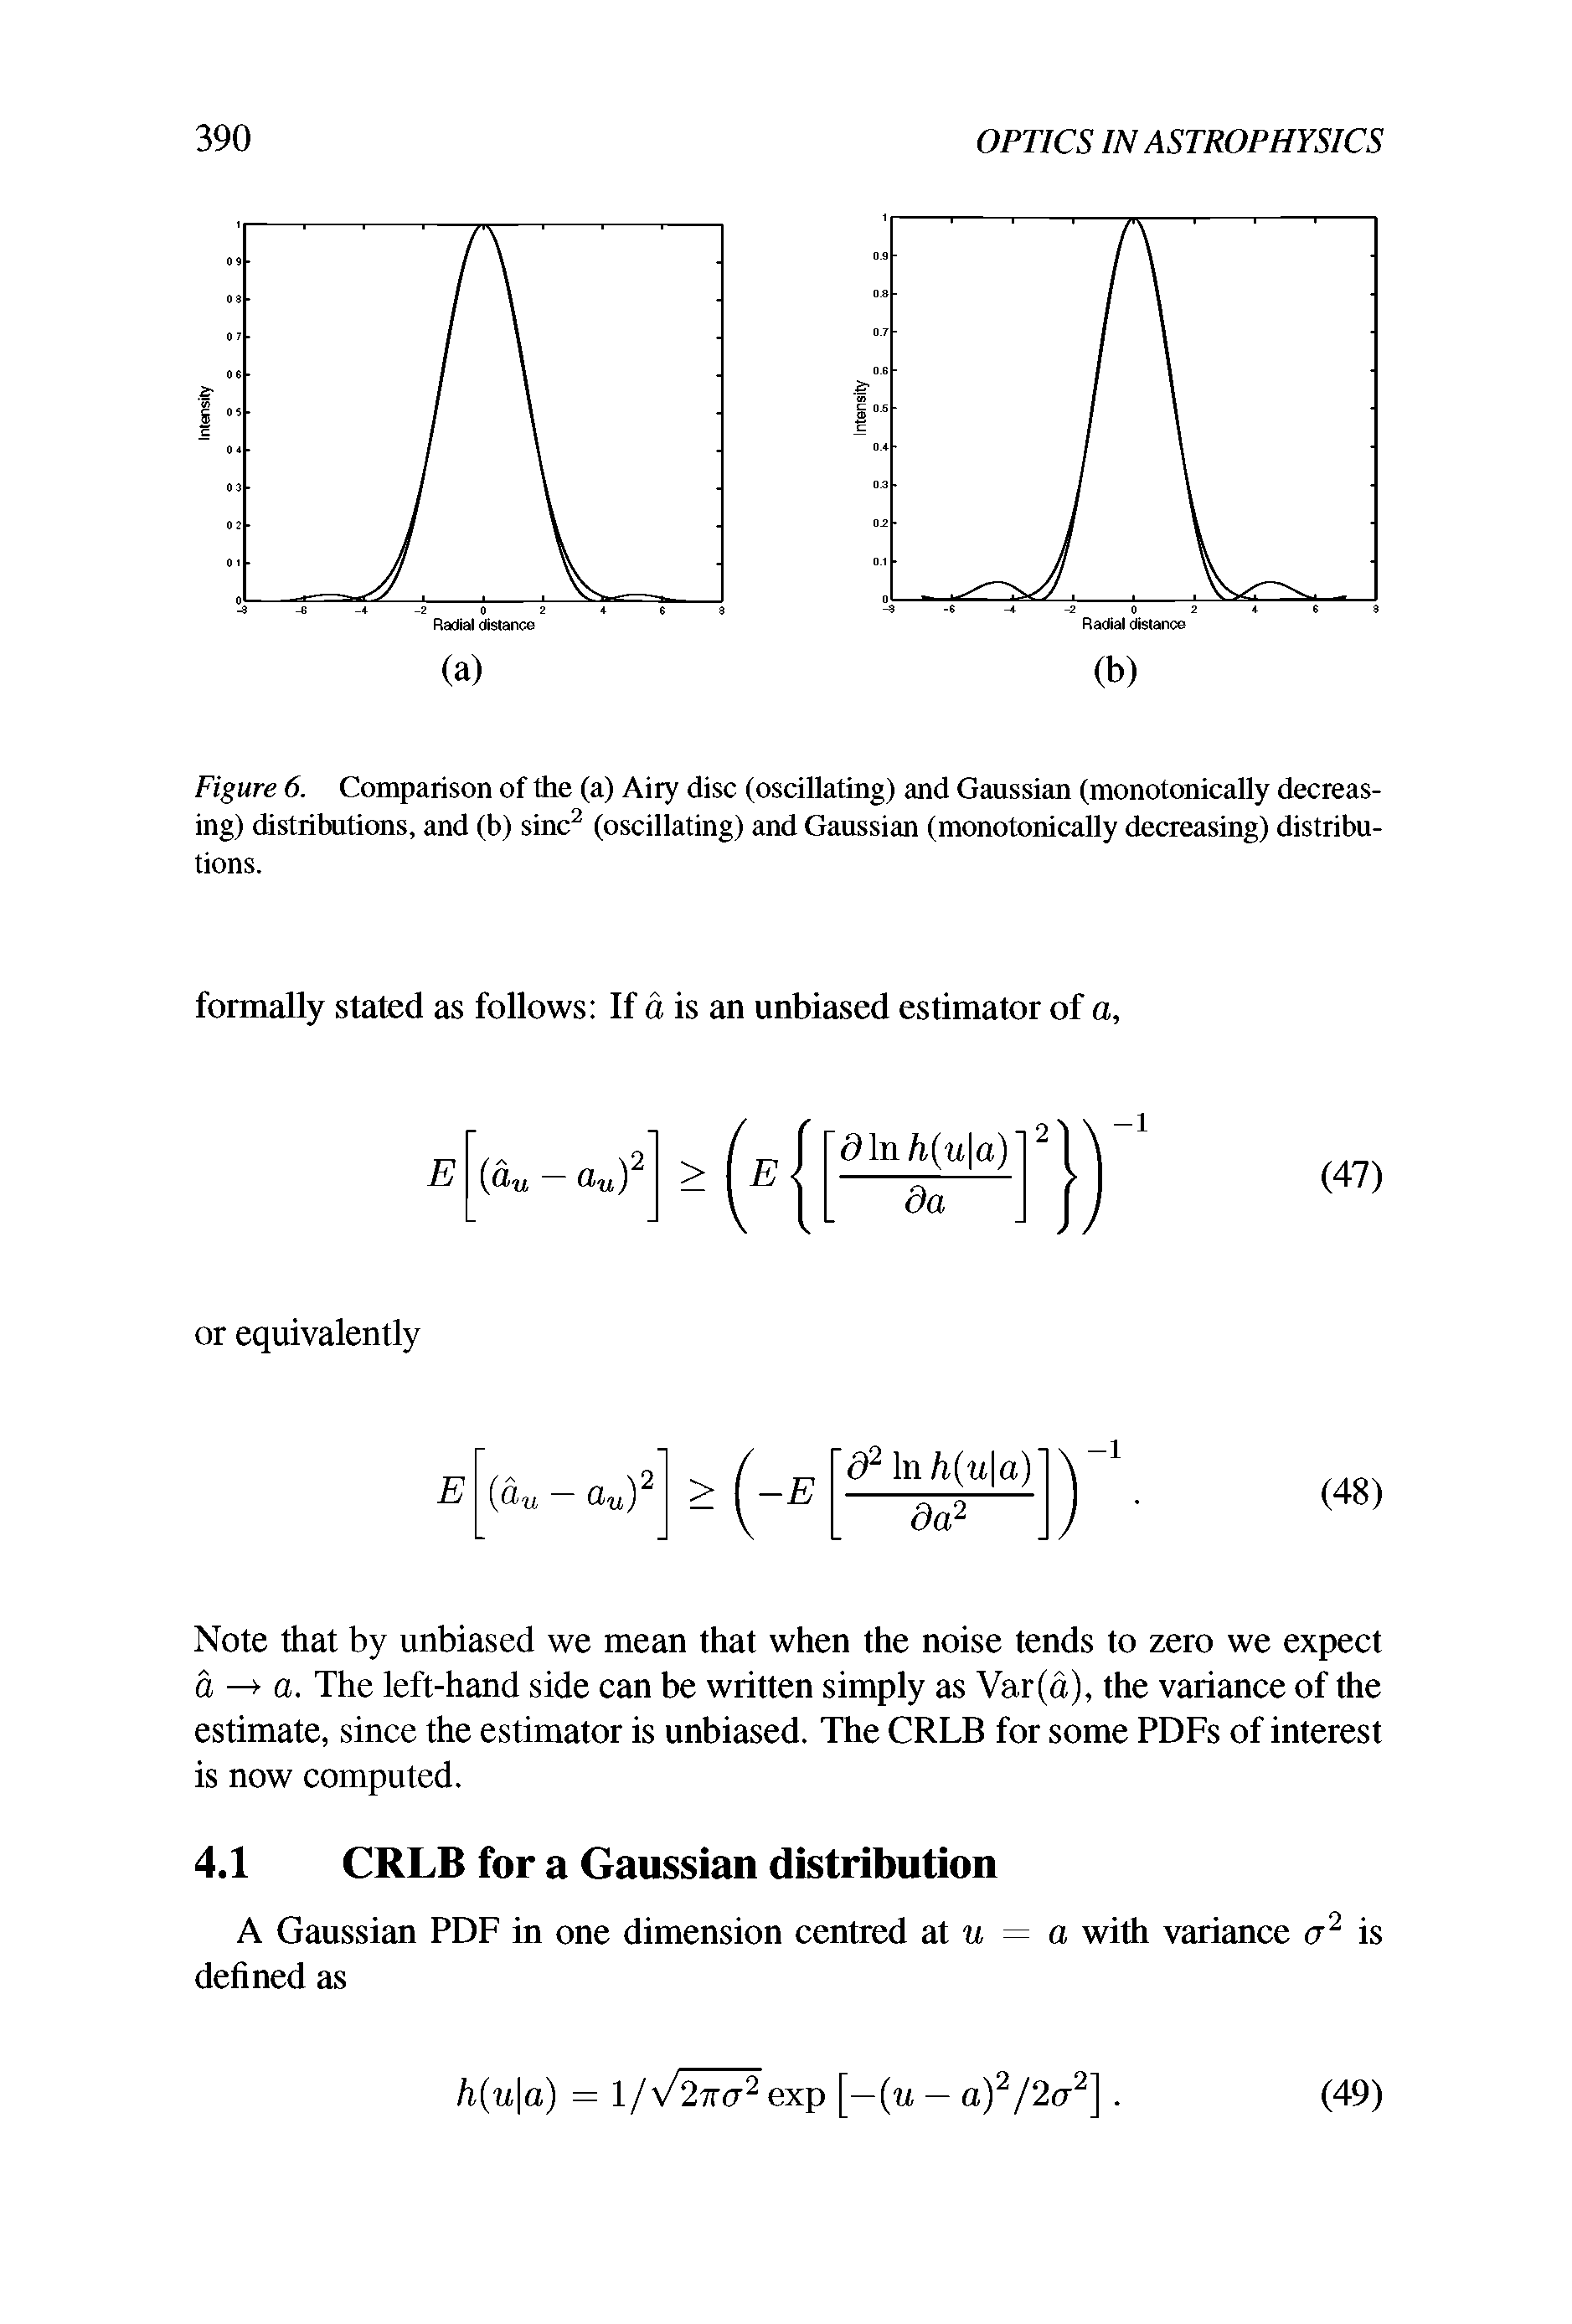 Figure 6. Comparison of the (a) Airy disc (oscillating) and Gaussian (monotonically decreasing) distributions, and (b) sinc (oscillating) and Gaussian (monotonically decreasing) distributions.